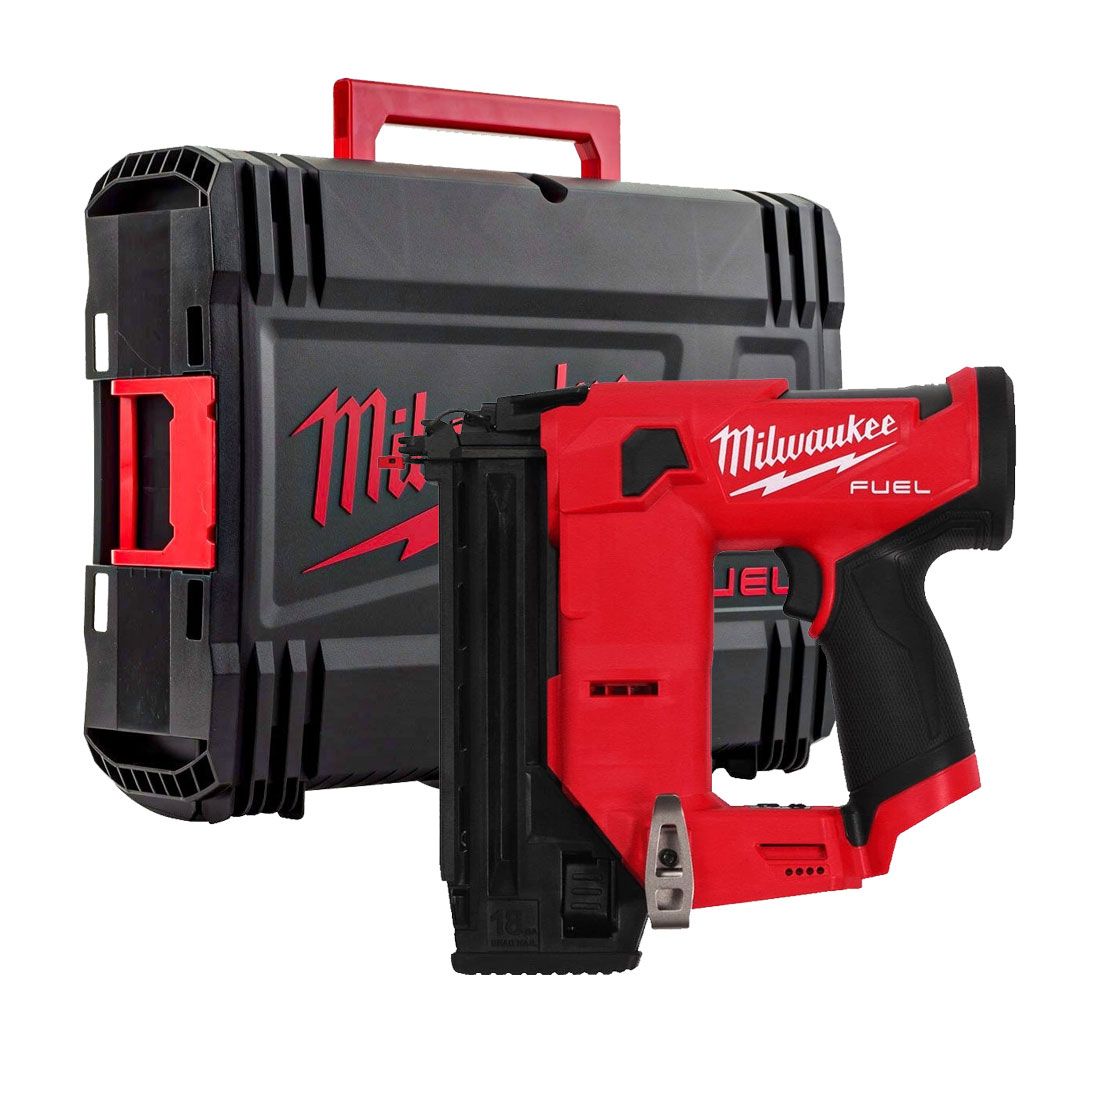 Milwaukee 12v Fuel 2nd Fix Straight Brad Nailer - M12FCN18GS-0X - Body Only 